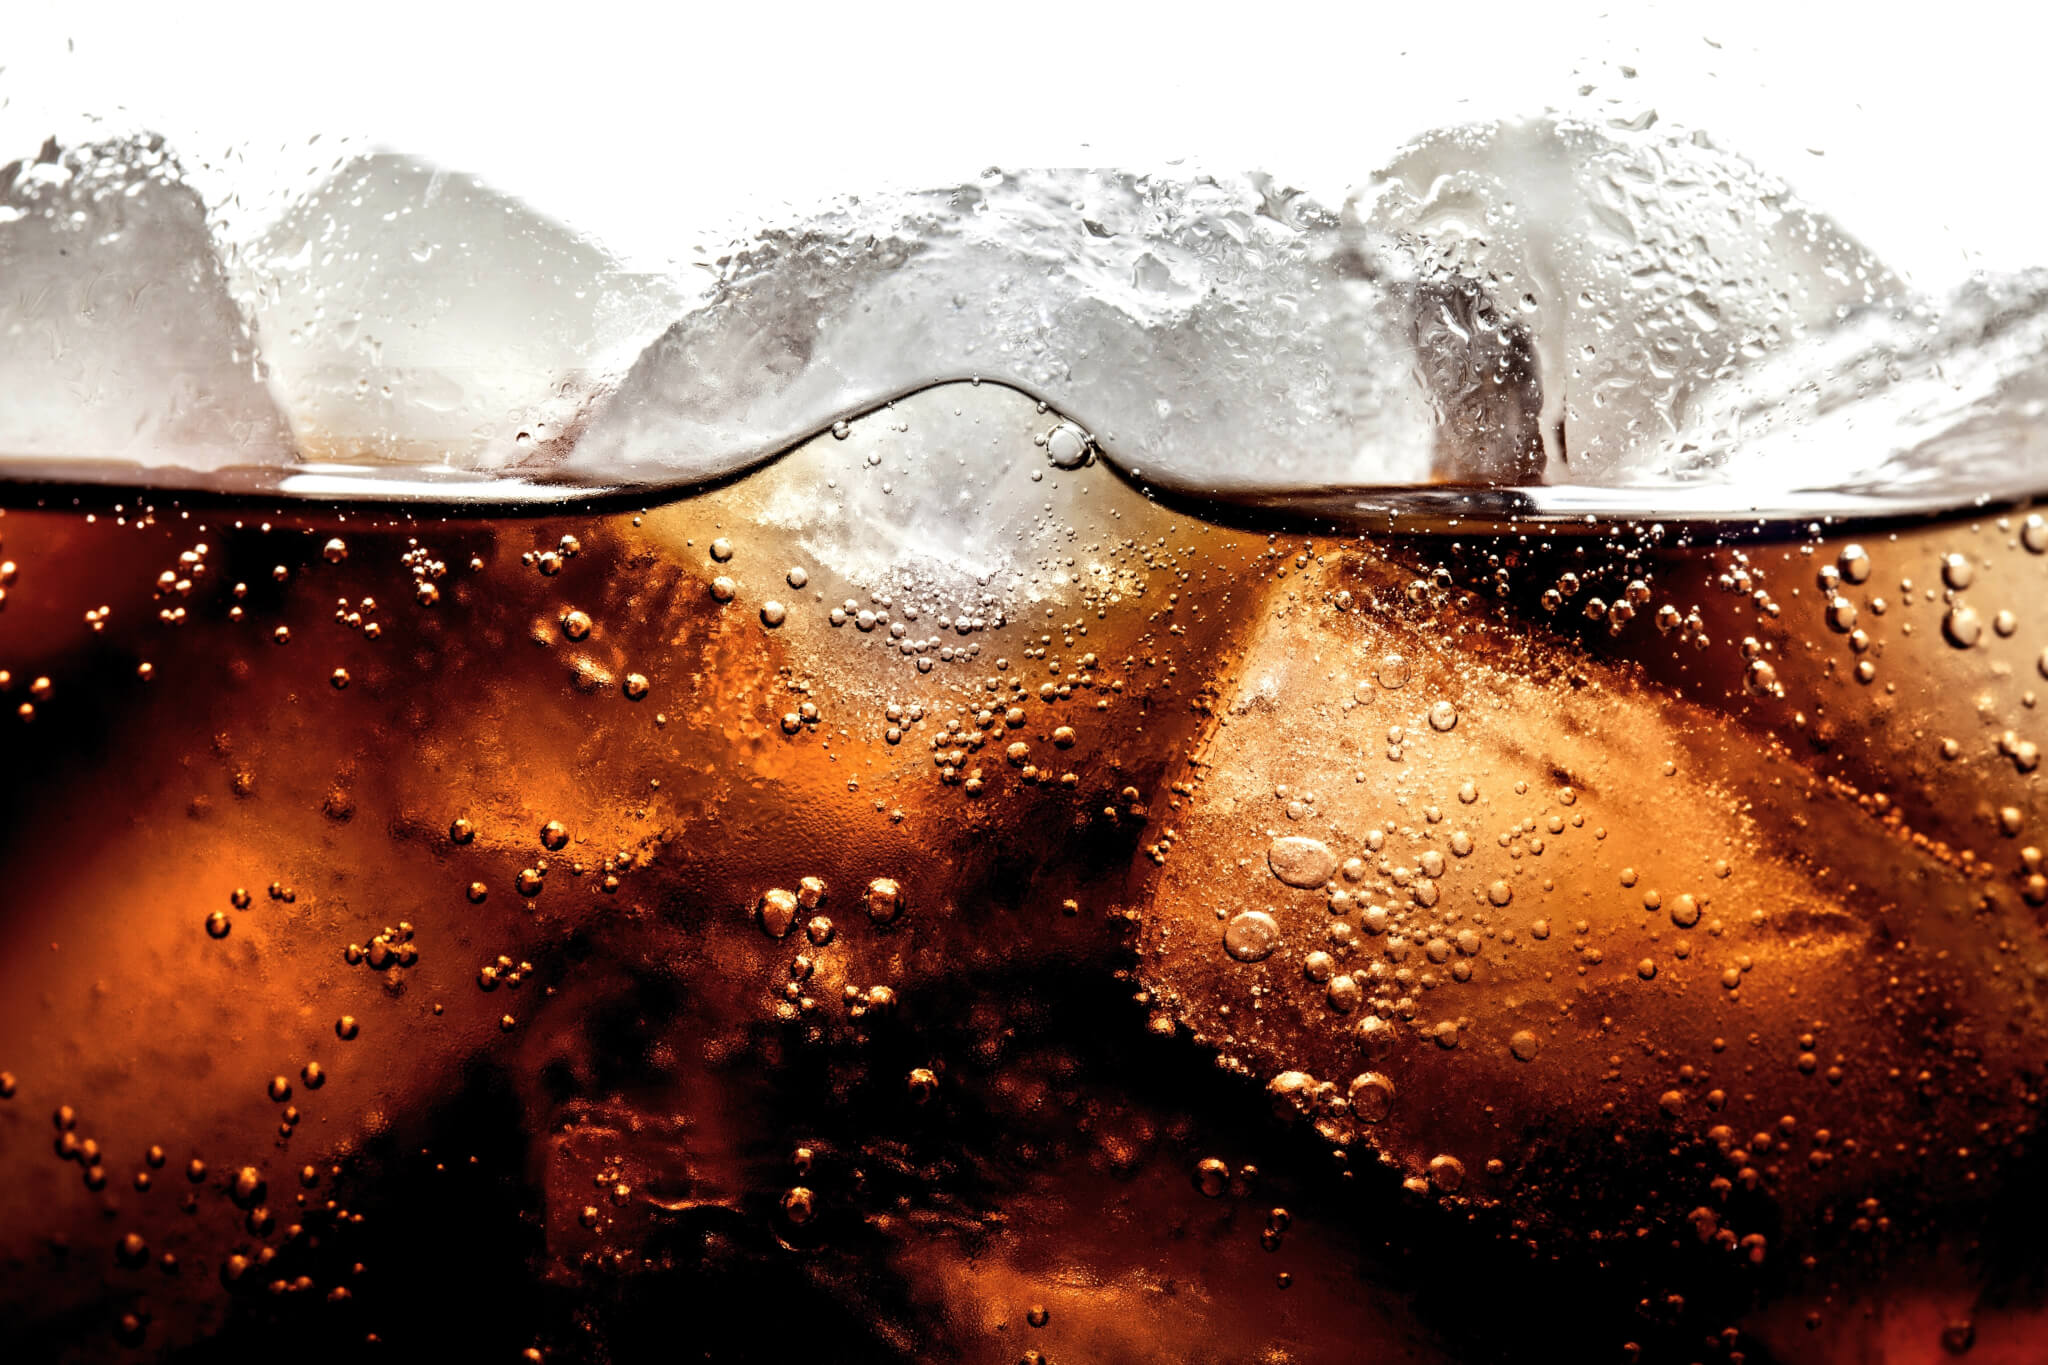 Drink soda, gain weight: Sugary beverages very clearly tied to obesity